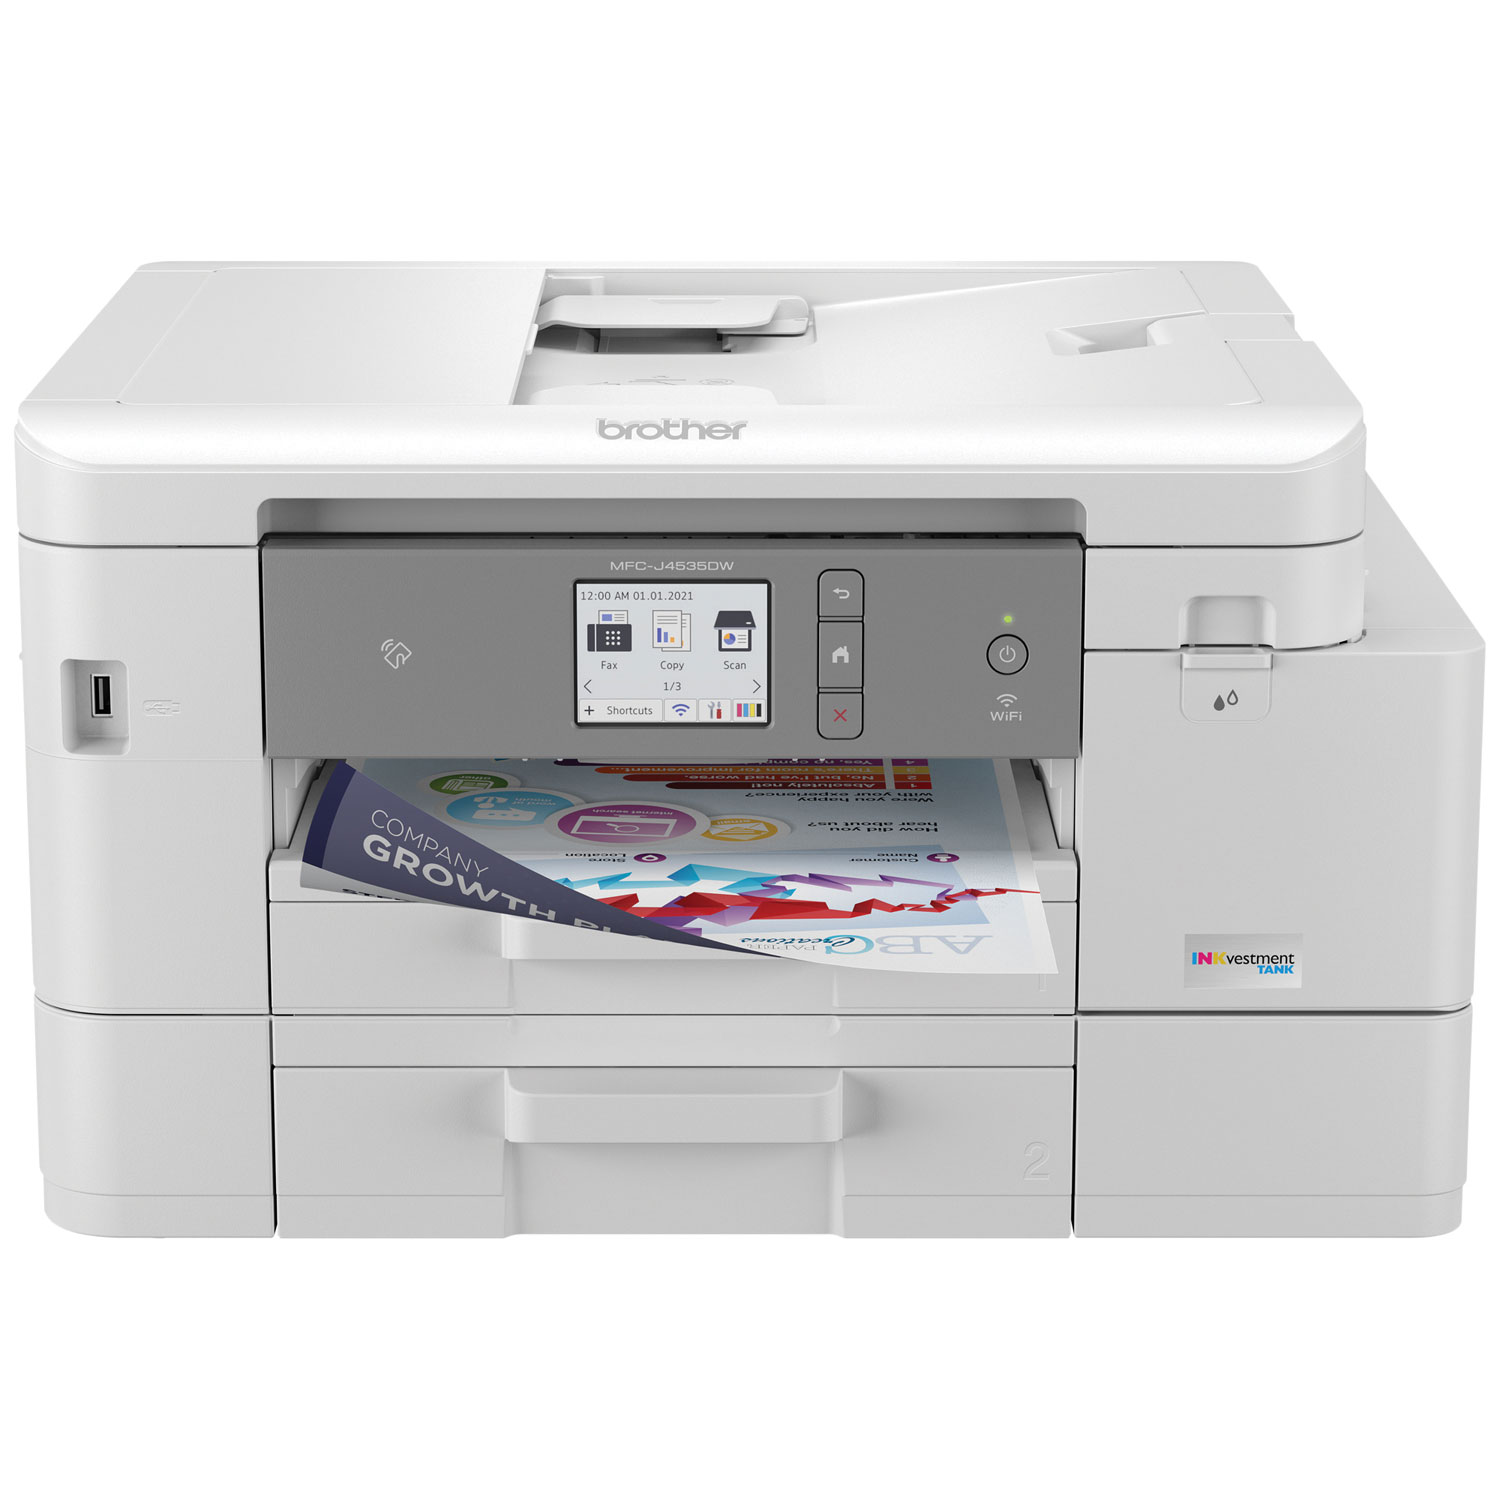 Brother INKvestment Tank Wireless All-In-One Inkjet Printer (MFC-J4535DW)